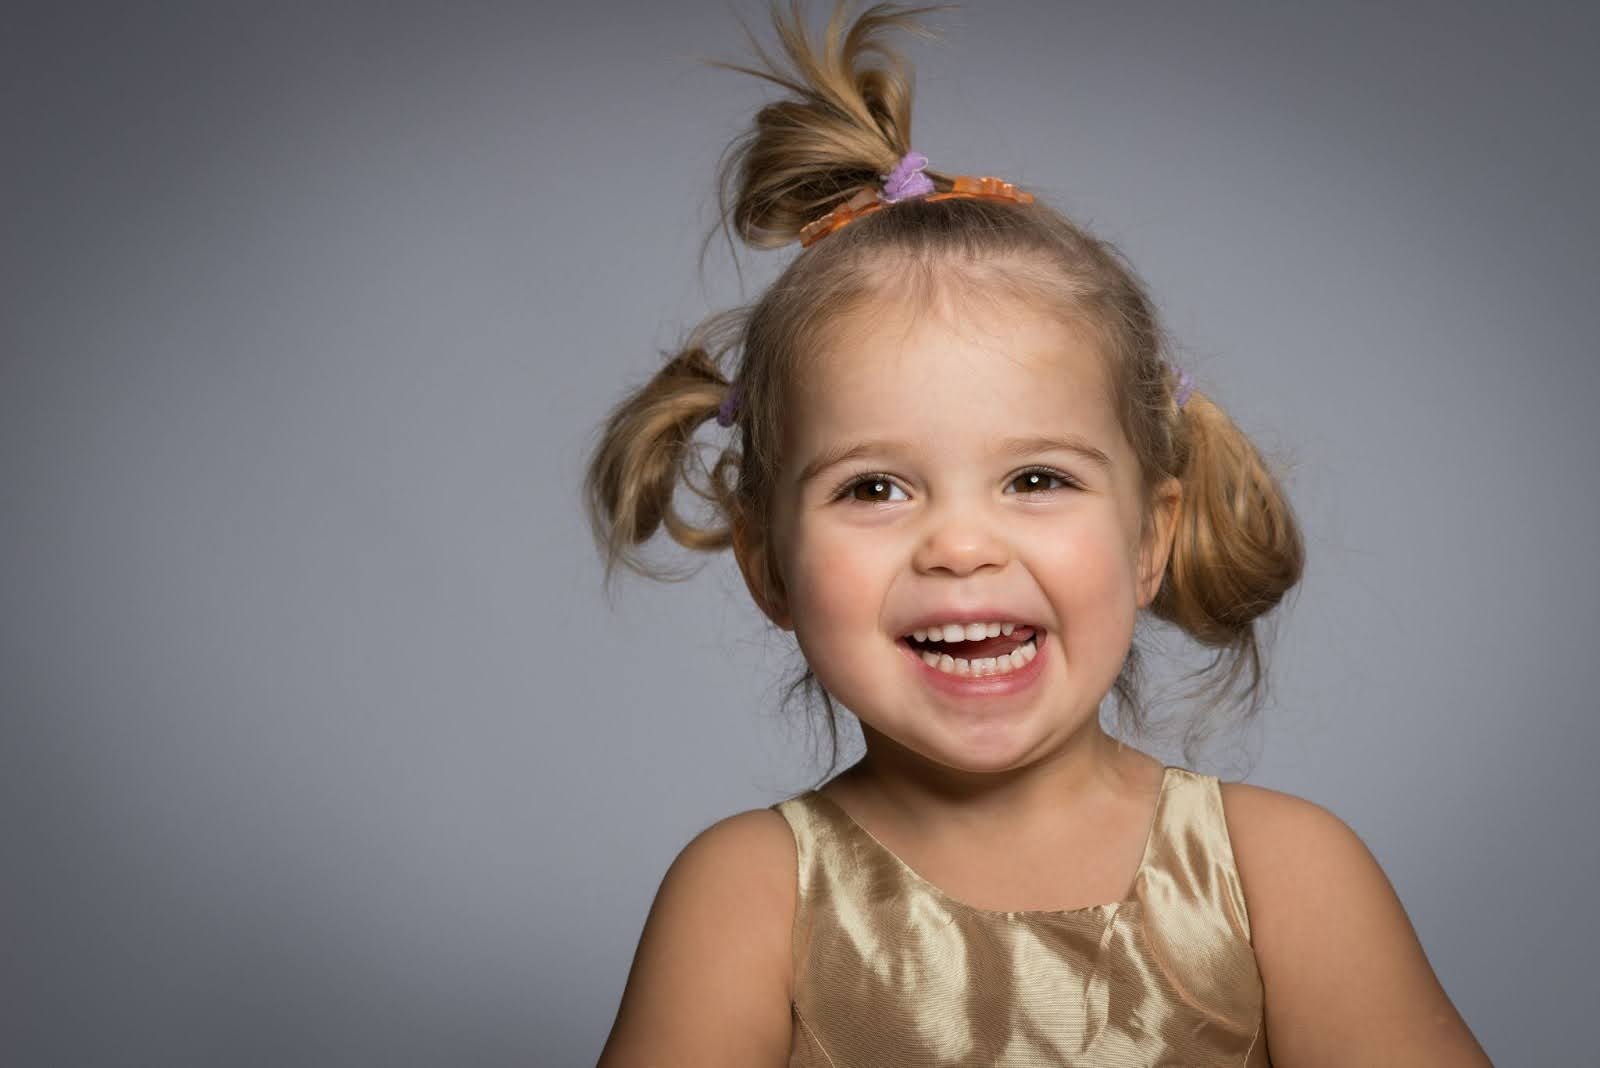 Toddler in a gold top with messy buns in her hair smiles against a gray background